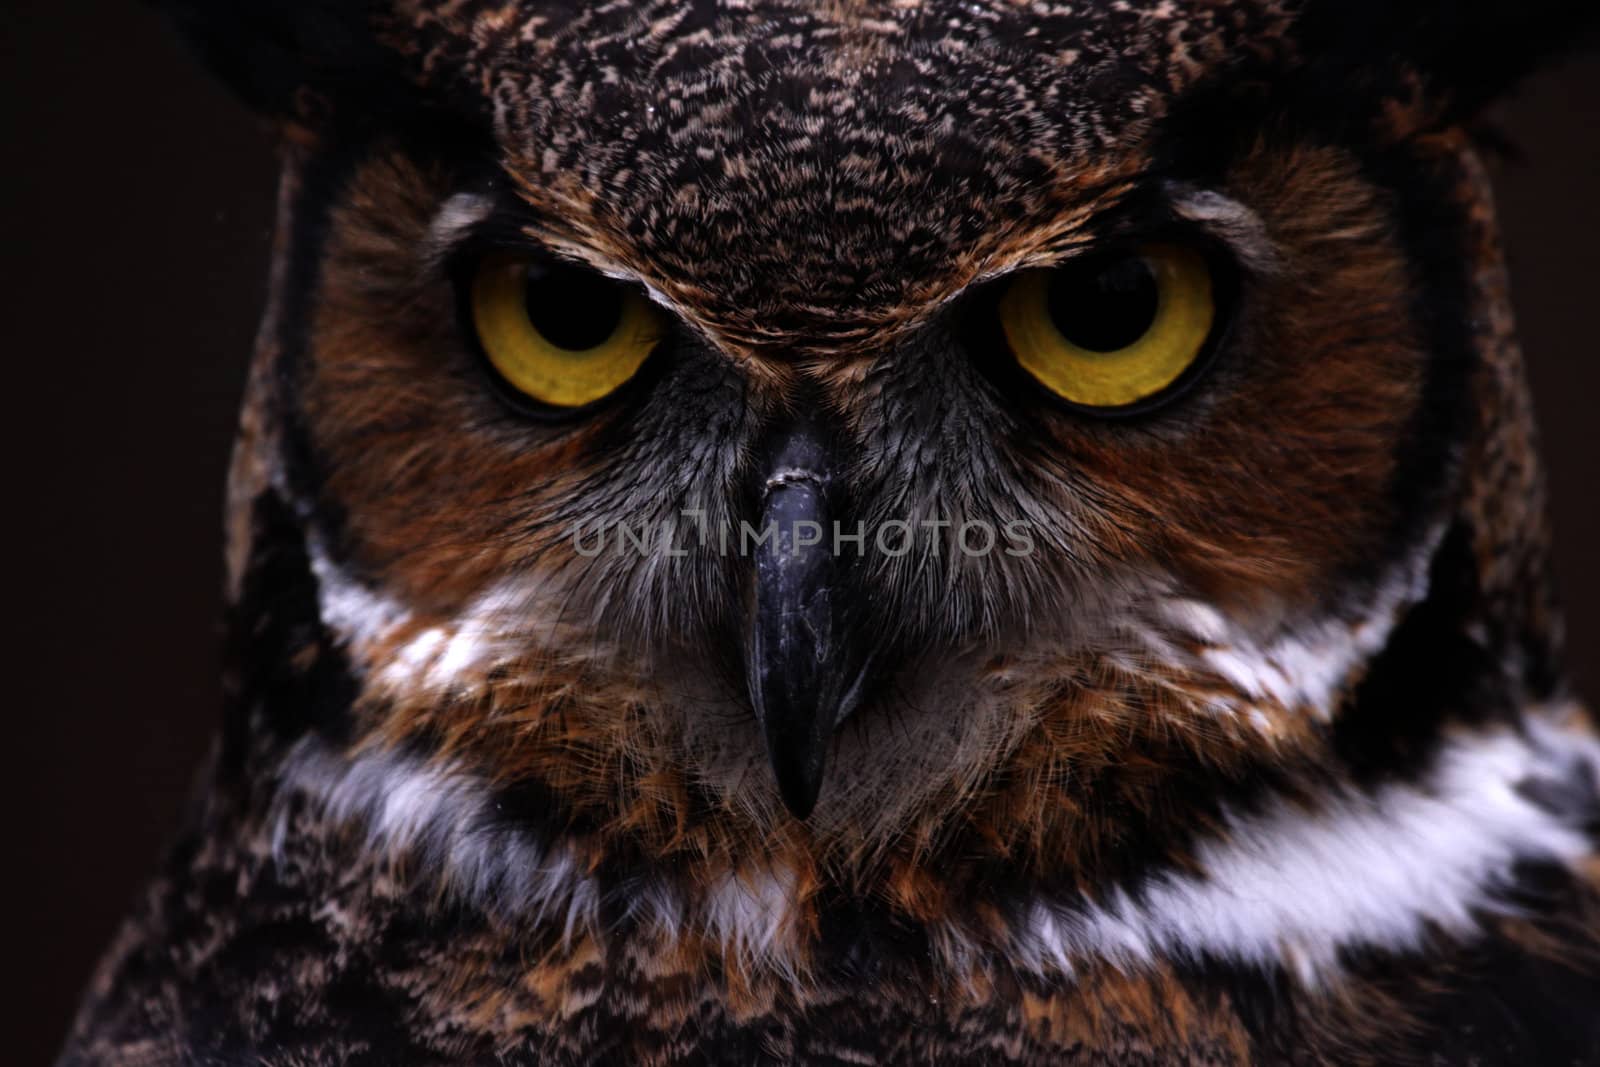 An extreme close-up of the face of a Great Horned Owl (Bubo virginianus)
